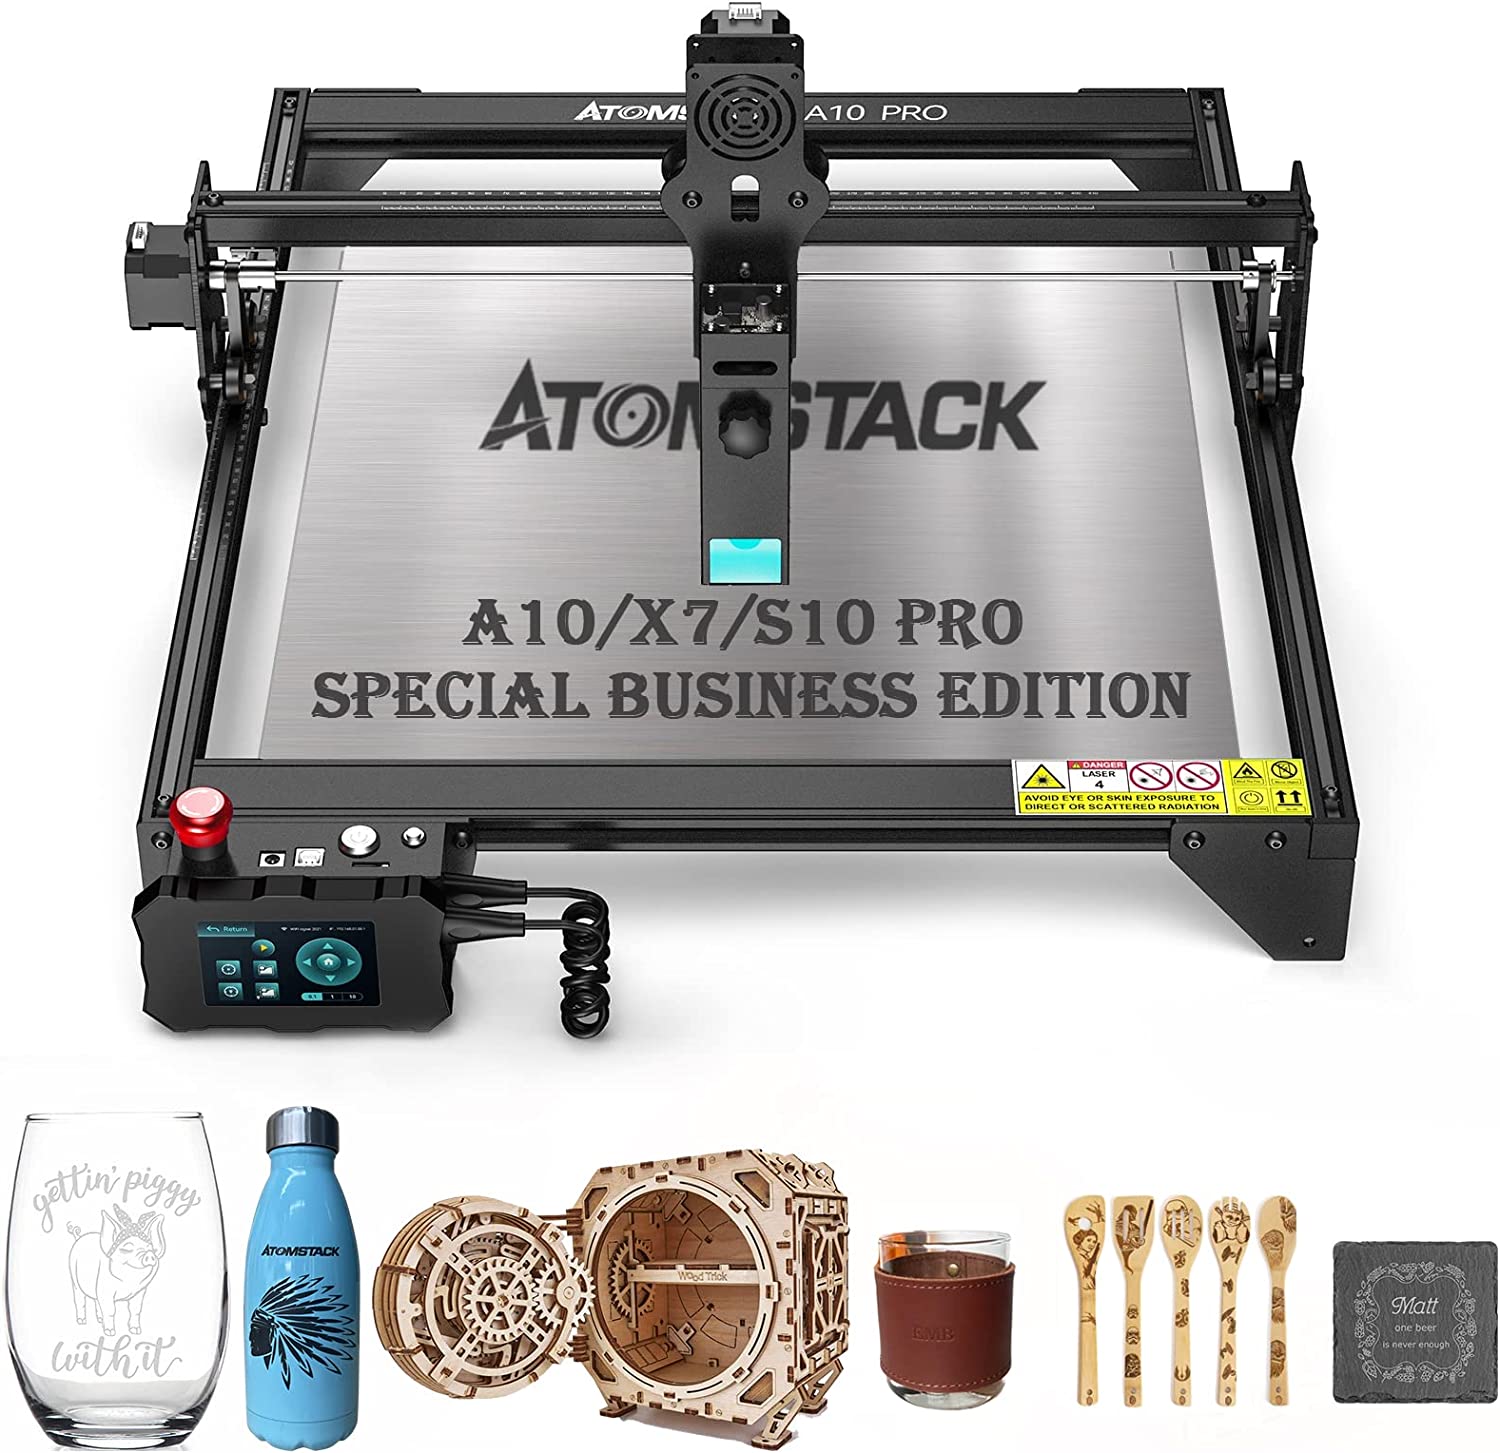 ATOMSTACK A10 Pro Laser Engraver and Cutter,10W Output Power Laser